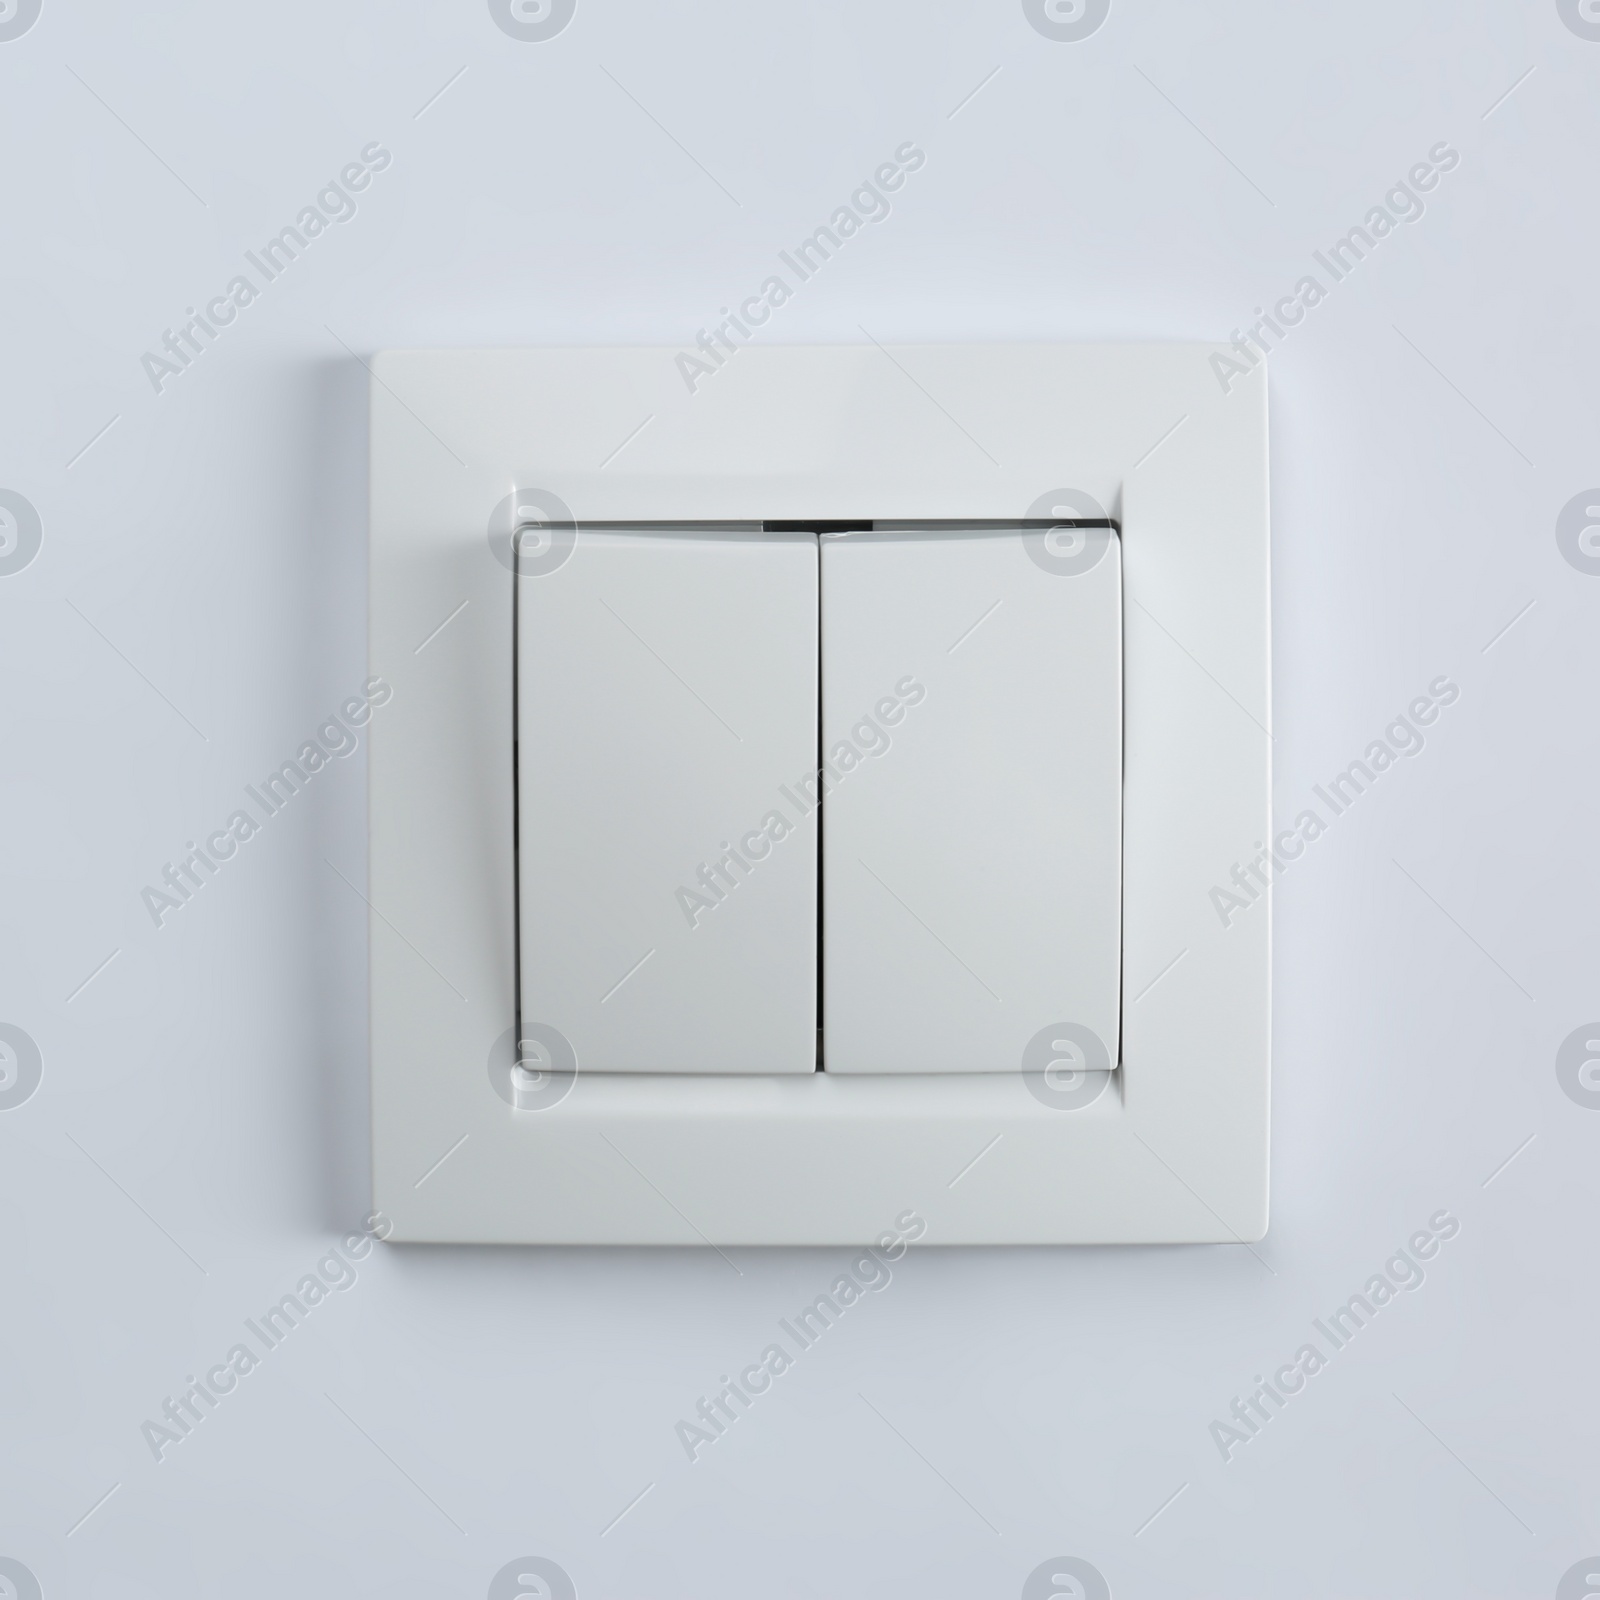 Photo of Light switch on white background. Electrician's equipment